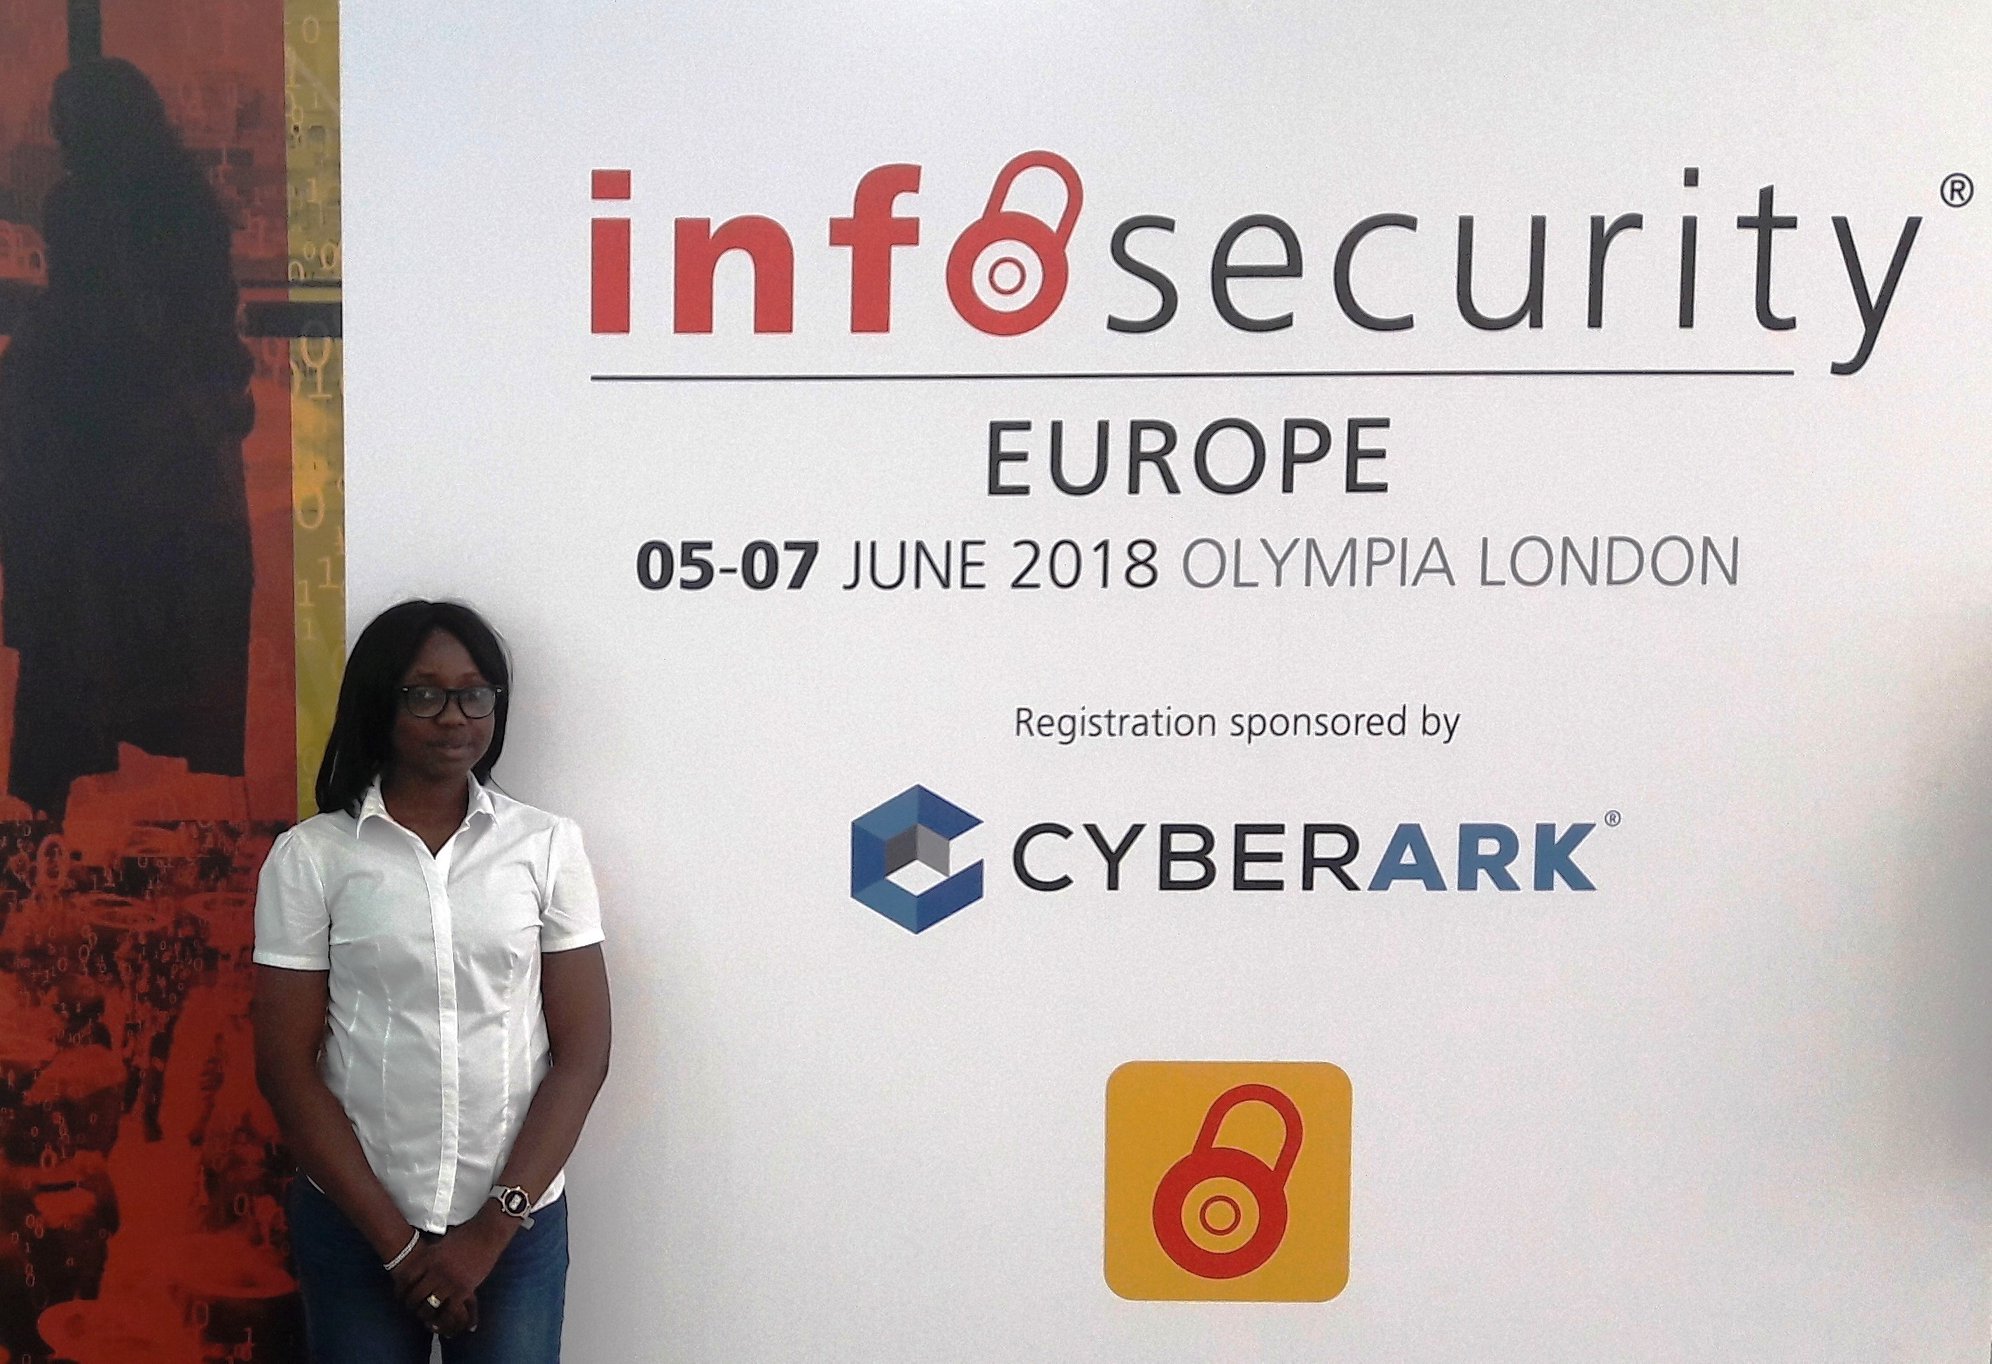 At The Olympia, London for InfosecurityEurope